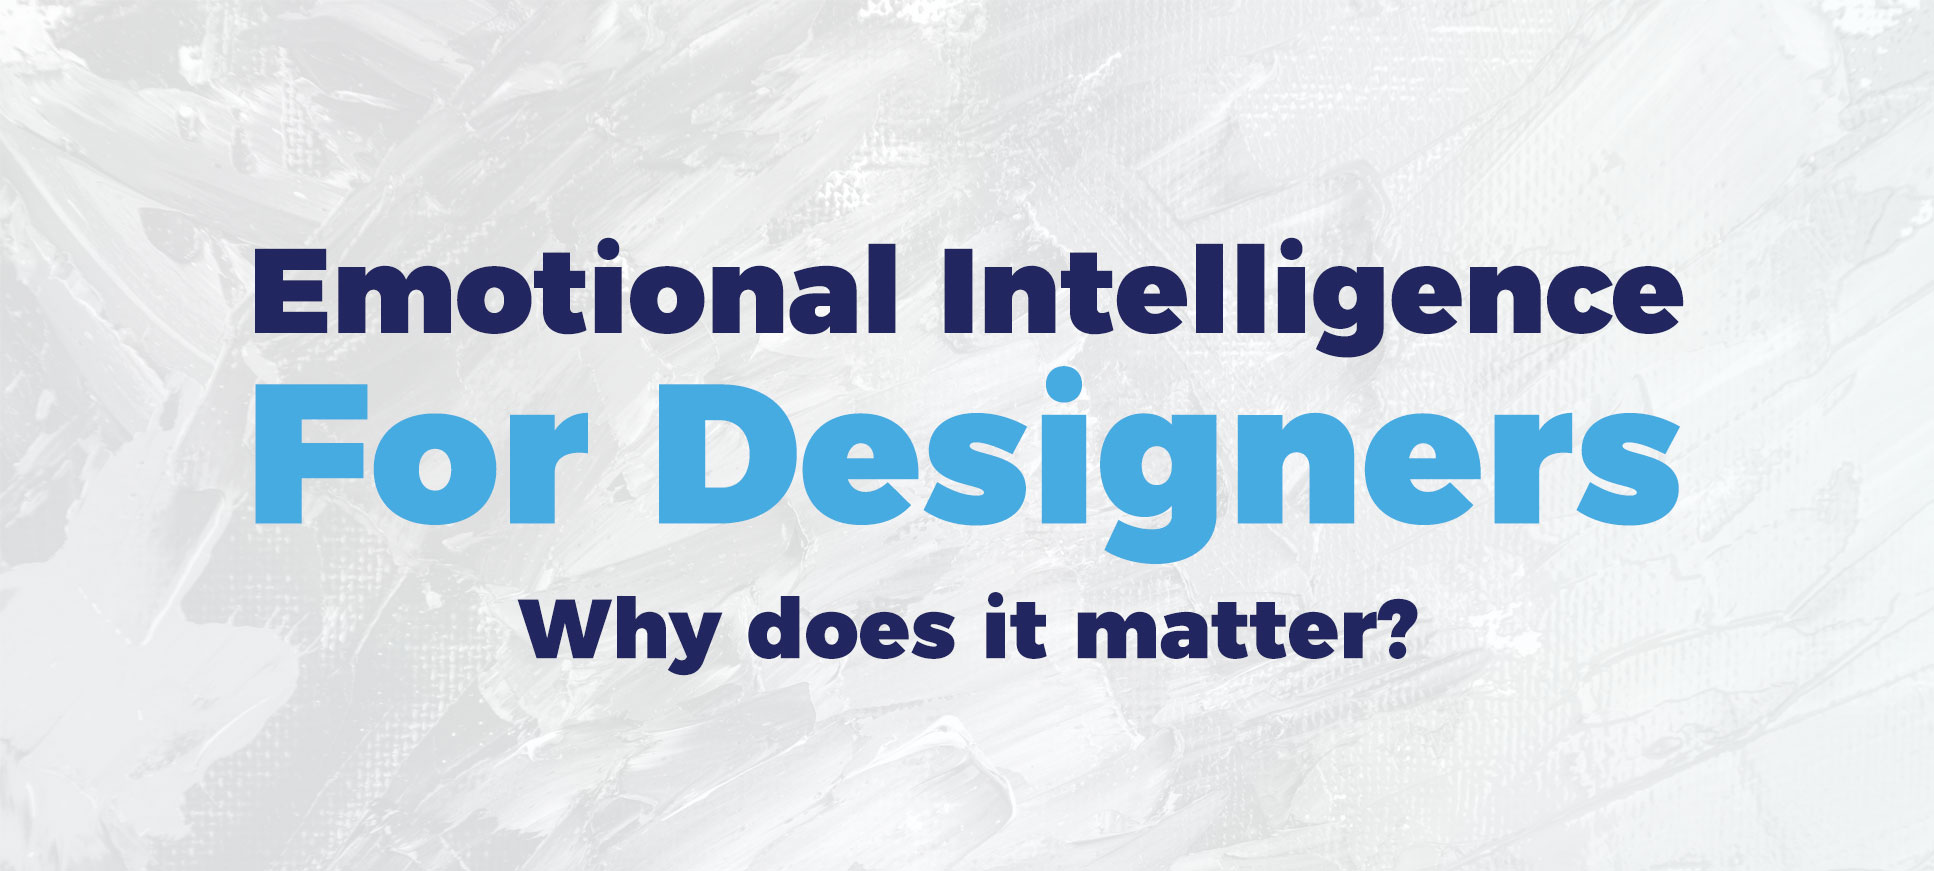 Emotional Intelligence for designers - why does it manners